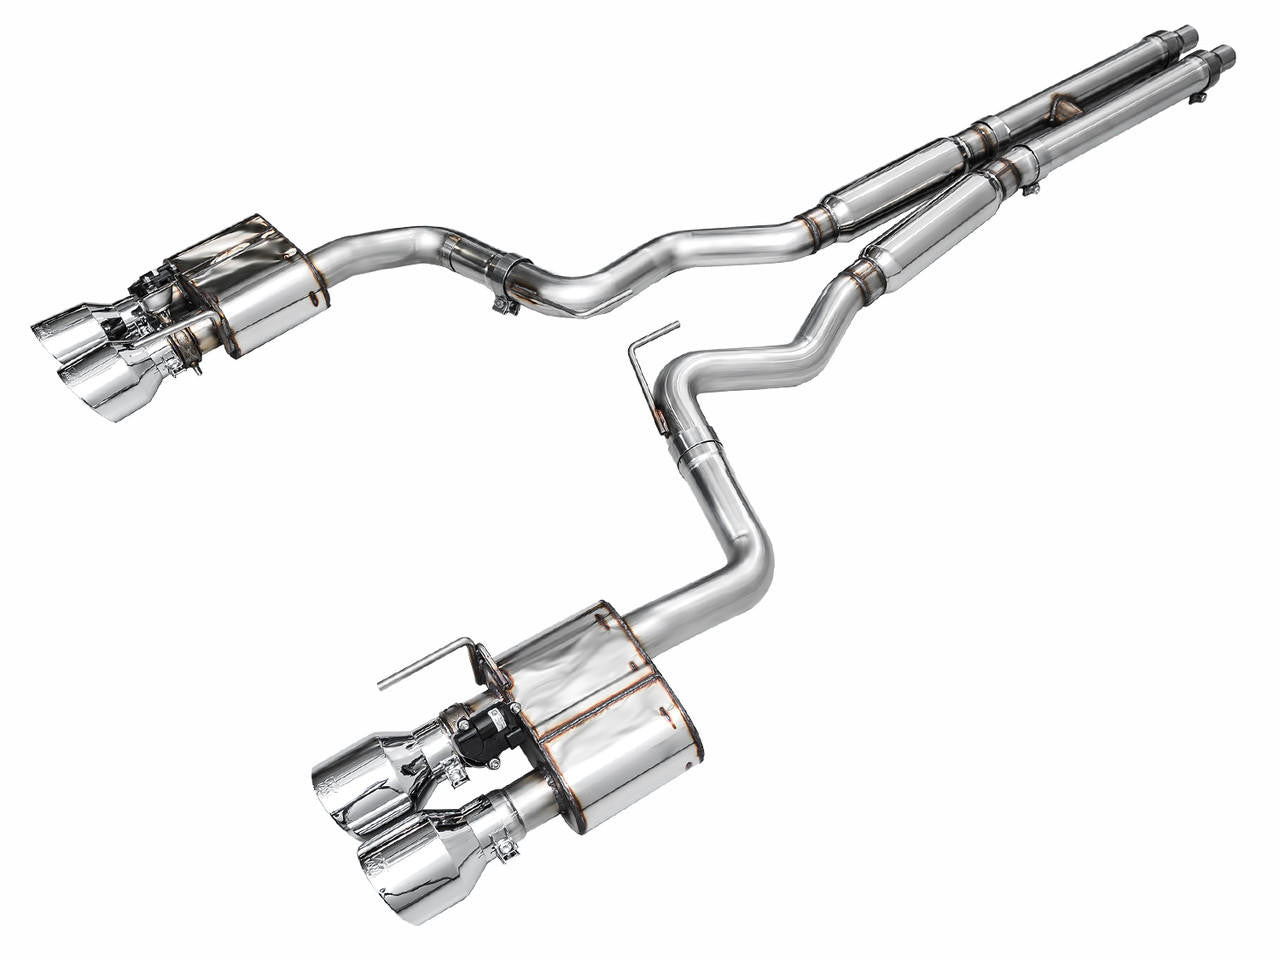 AWE Tuning AWE SwitchPath Exhaust for S650 Mustang Dark Horse - Quad Chrome Silver Tips 3025-42375 